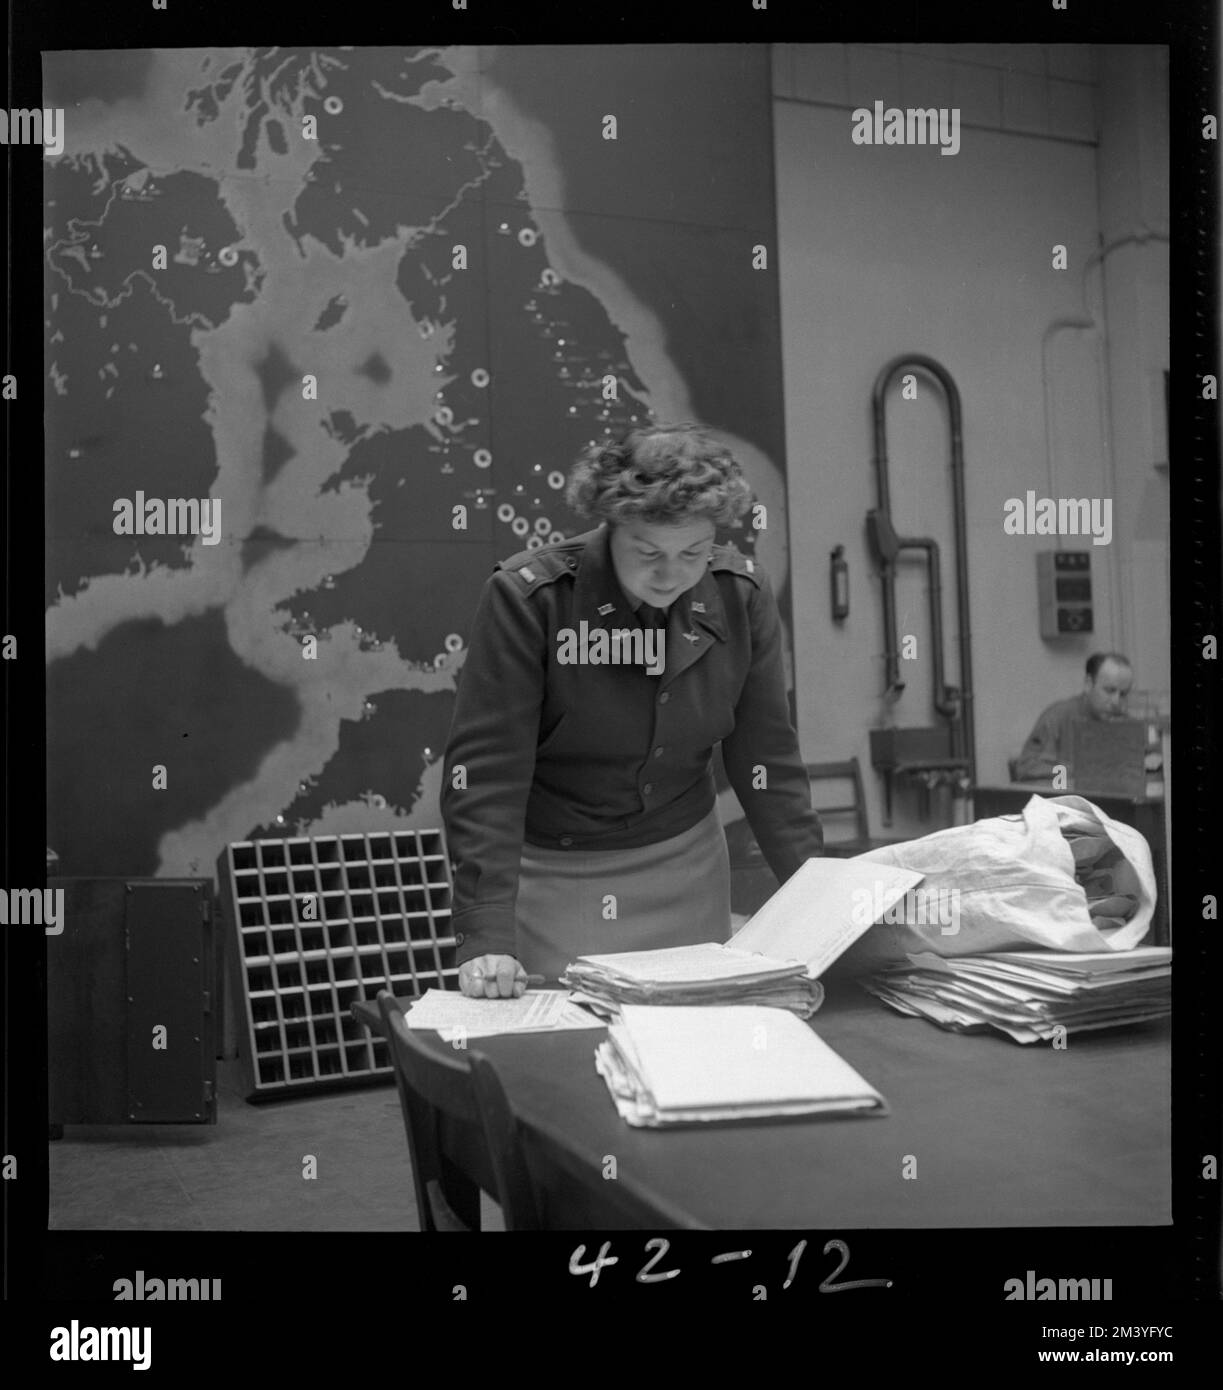 Lt. Virginia N. Justy, 502 1/2 South Ogden St., Los Angeles, Calif., in front of Airdrome status map in ops. room, Toni Frissell, Antoinette Frissell Bacon, Antoinette Frissell Stock Photo